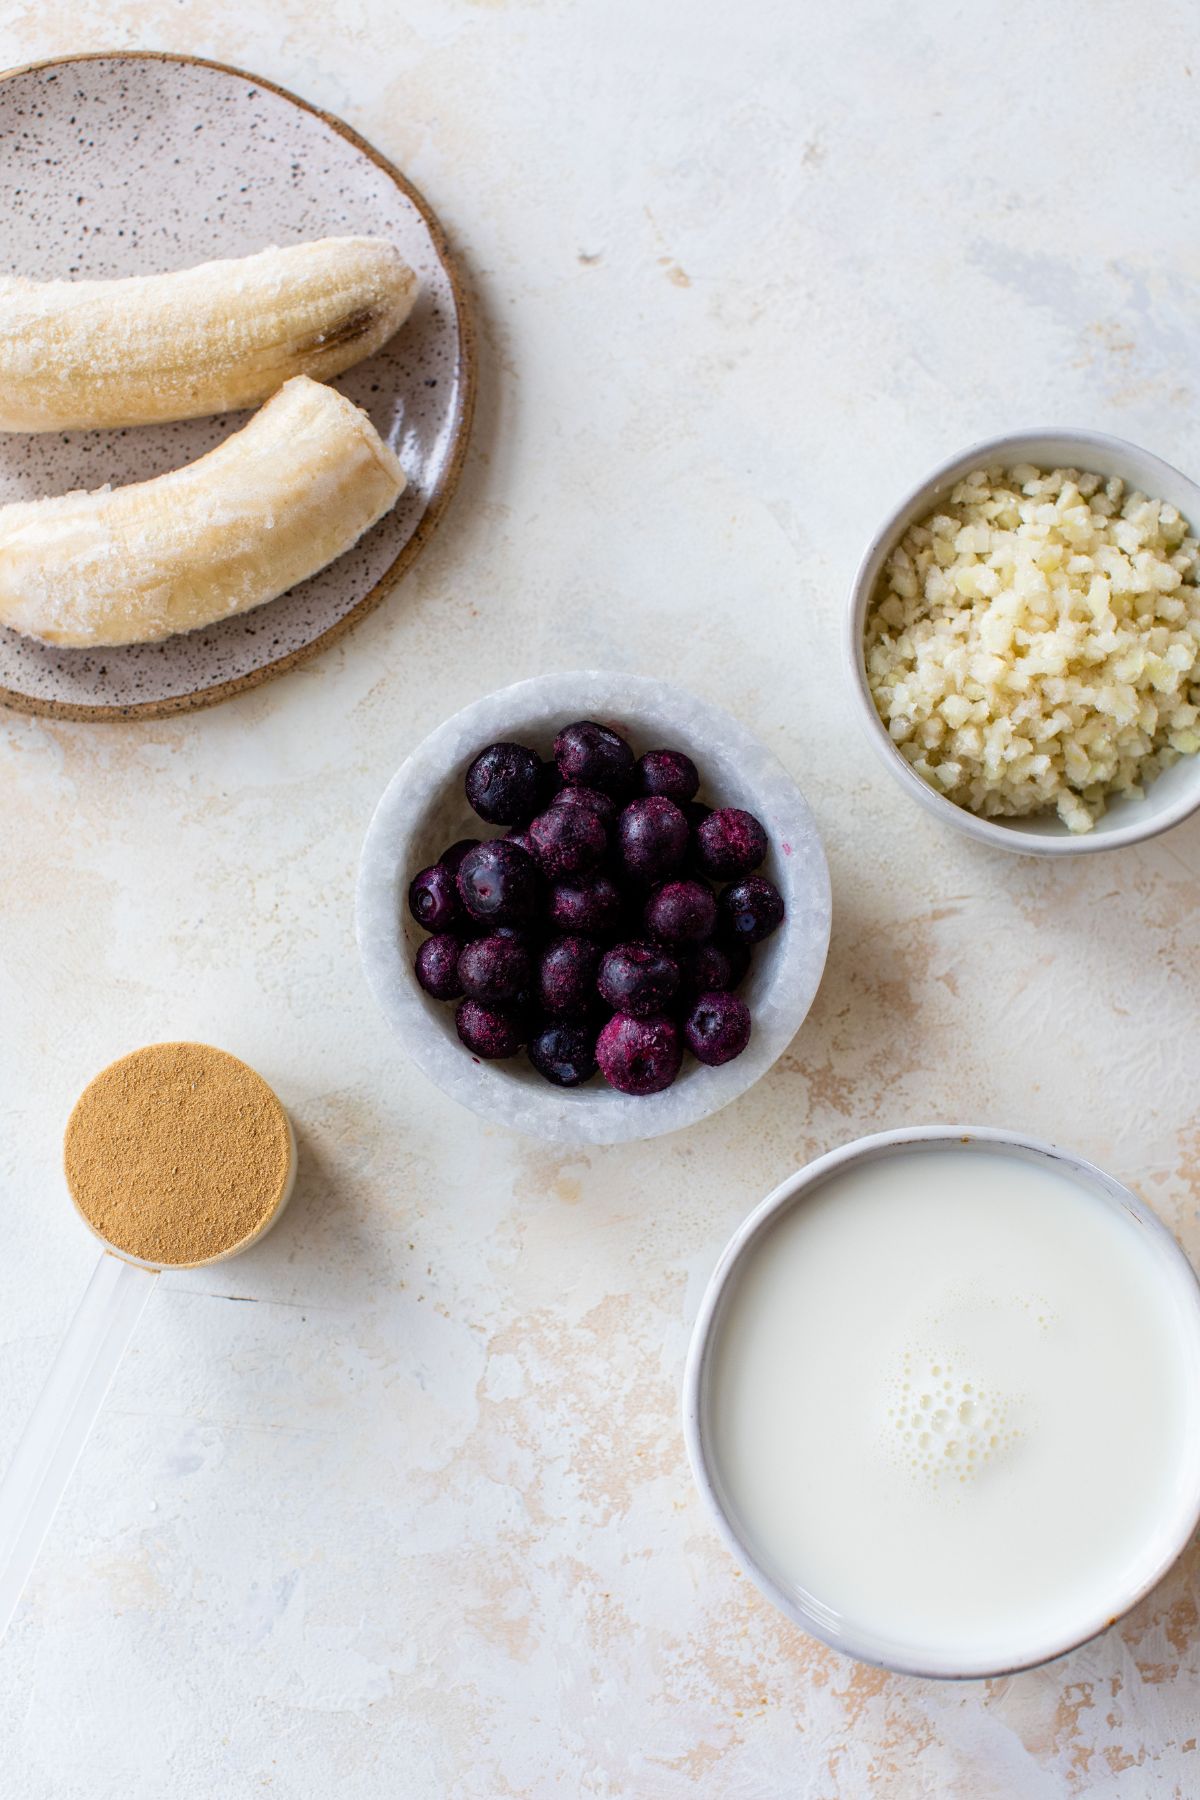 Blueberries, frozen banana, milk and cauliflower divided into small bowls.